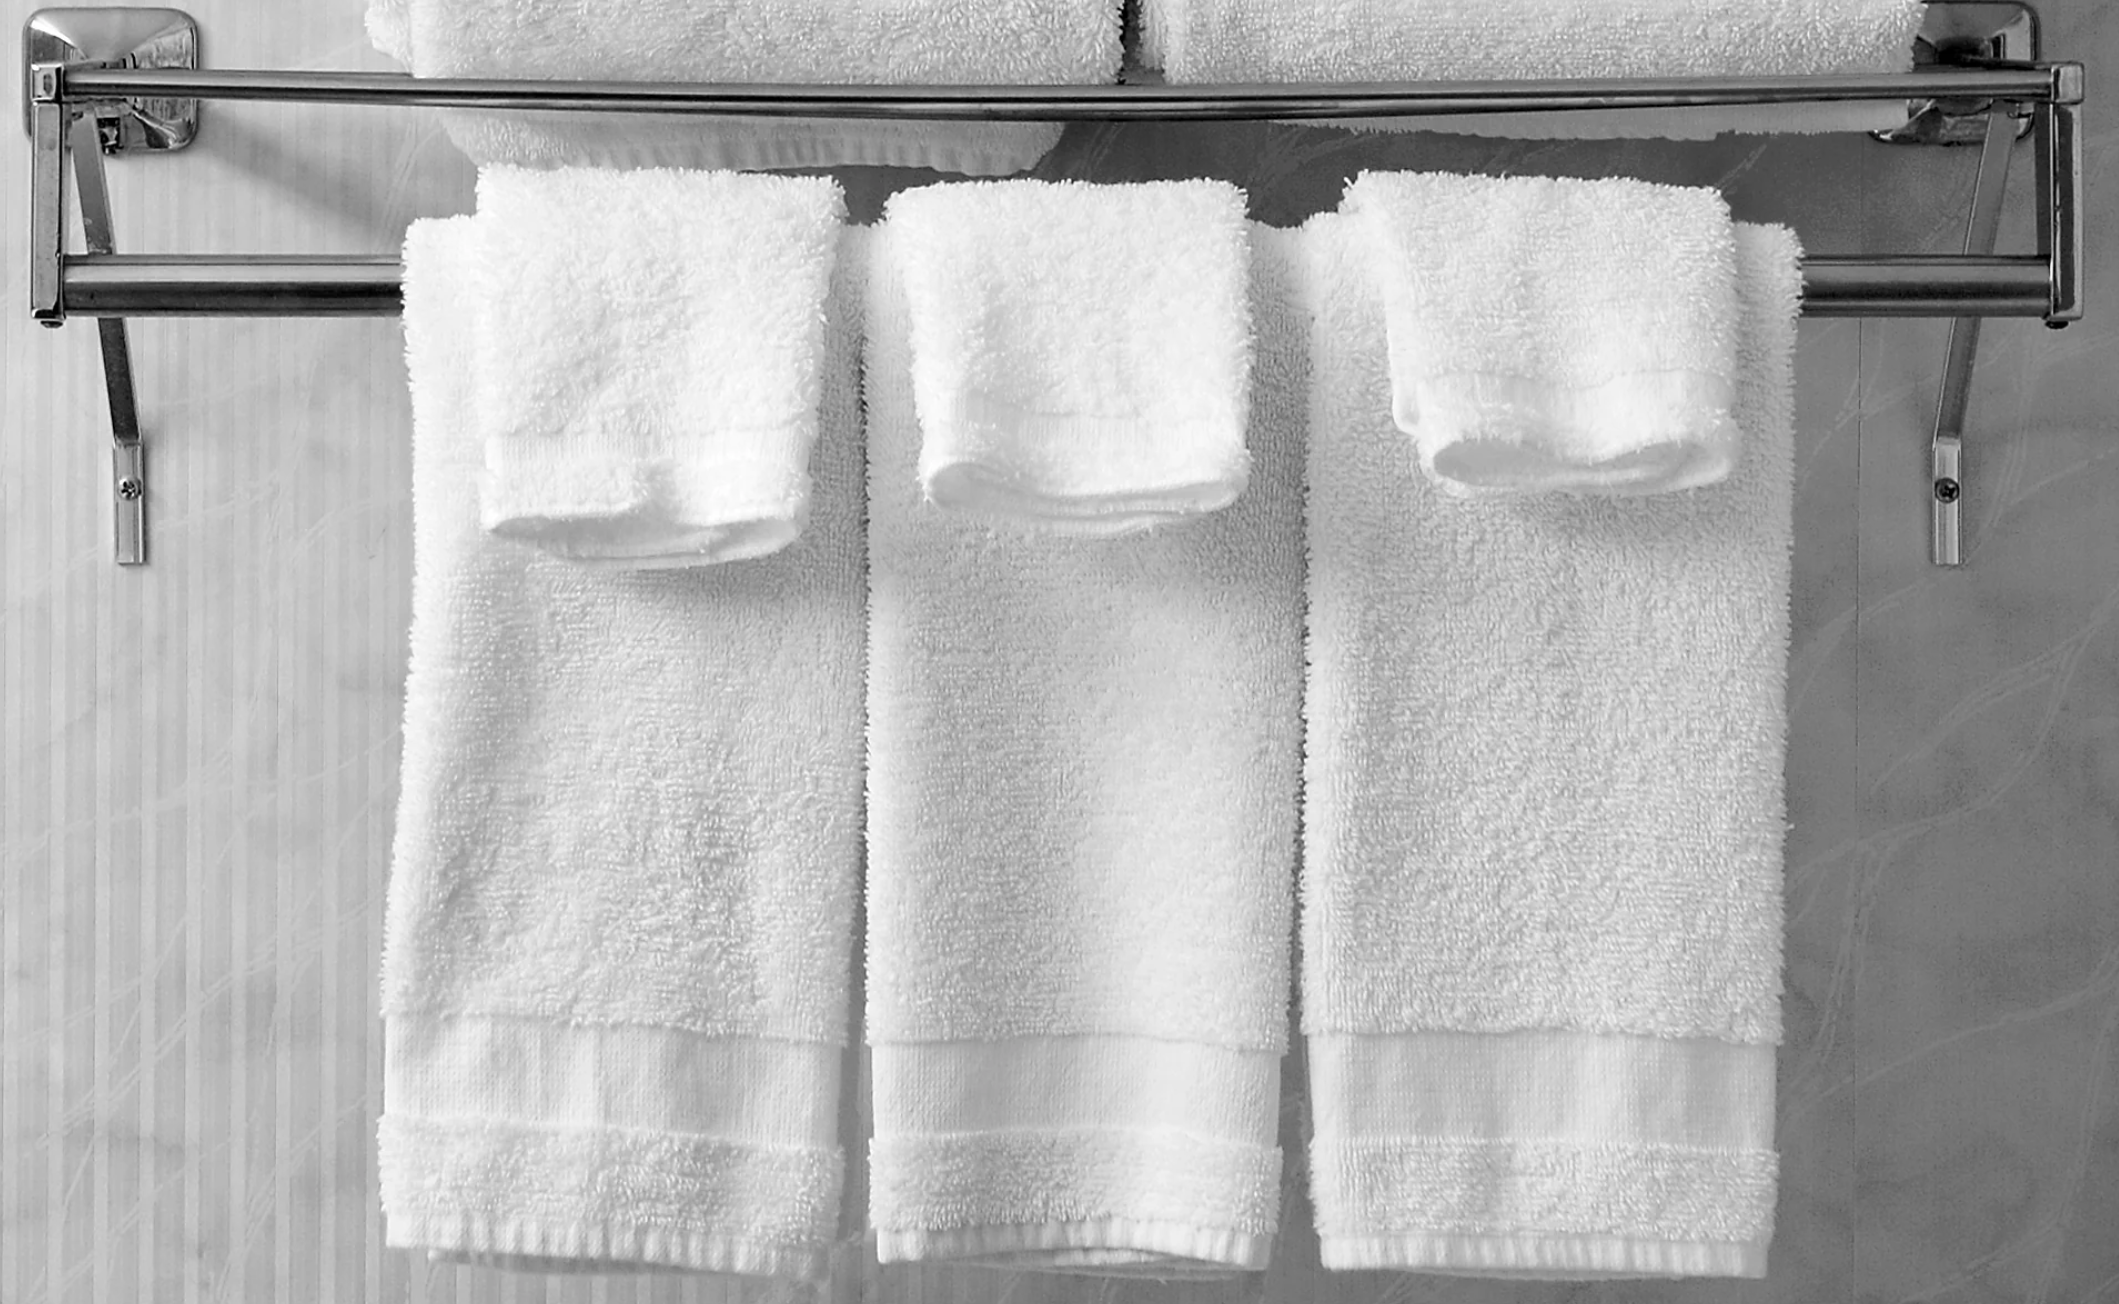 How do hotels keep their towels white and soft? - Textile